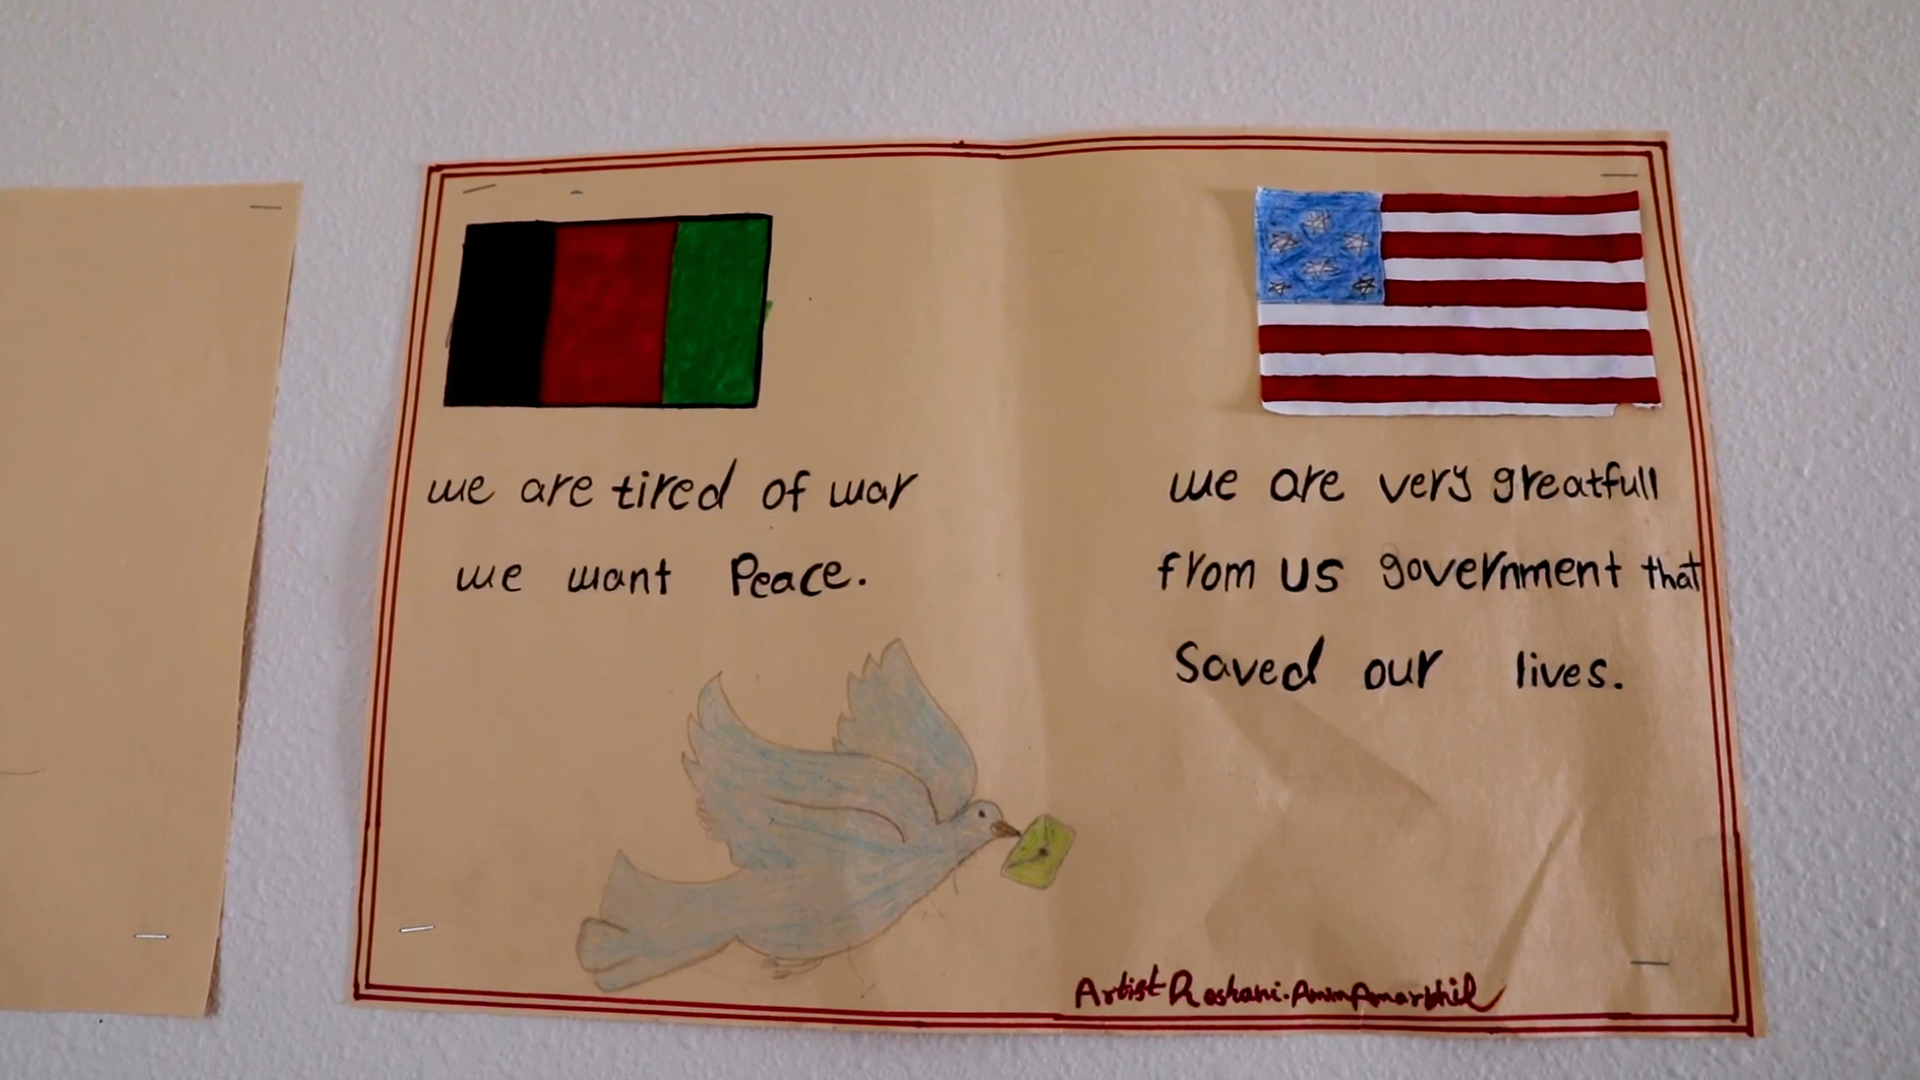 A hand-drawn poster shows an Afghan flag with the legend 